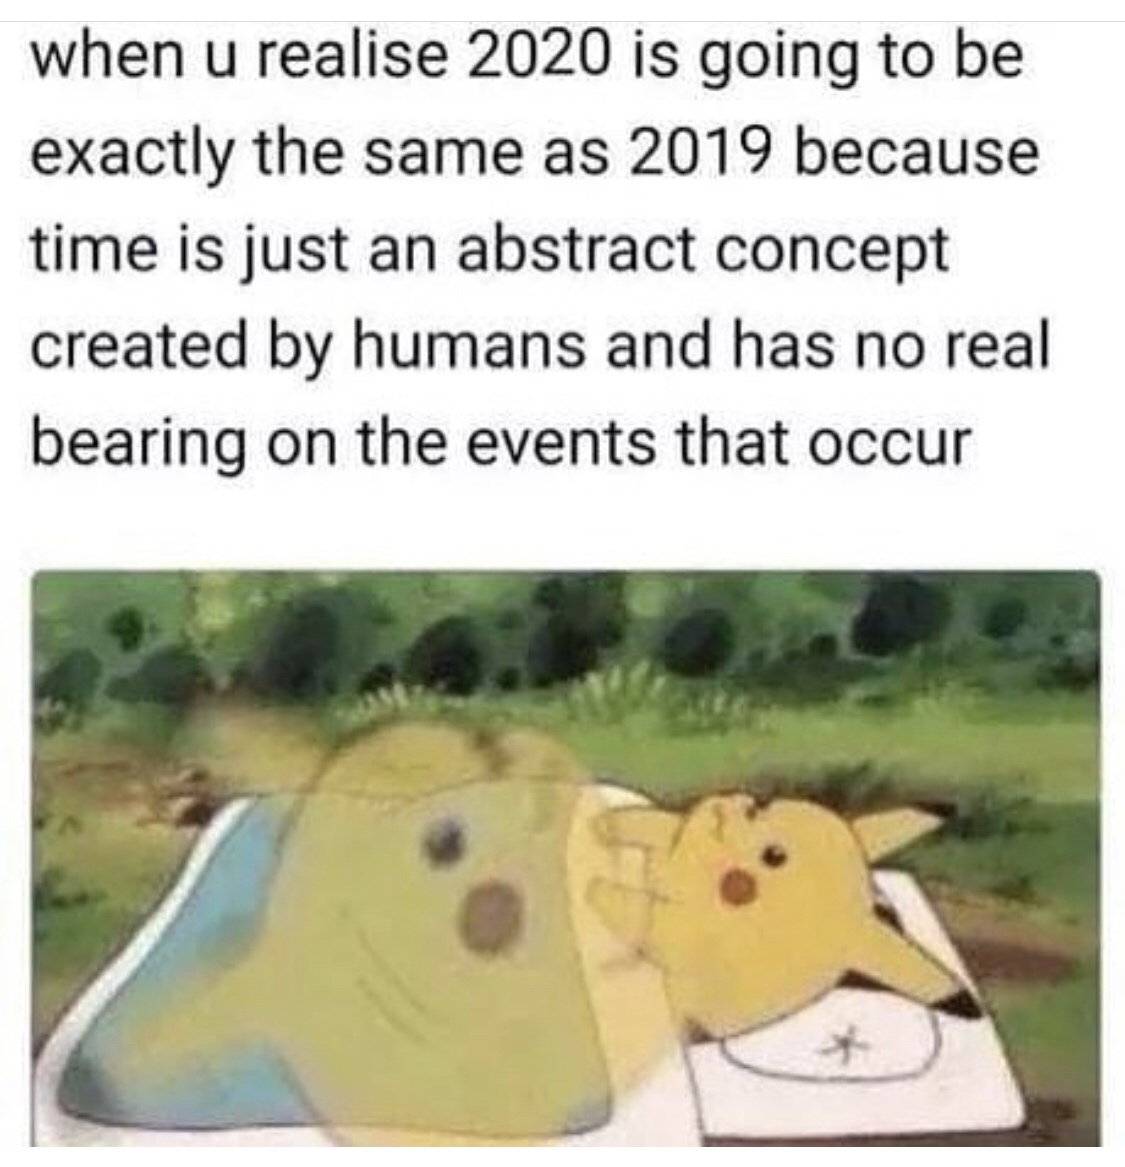 time is an abstract concept meme - when u realise 2020 is going to be exactly the same as 2019 because time is just an abstract concept created by humans and has no real bearing on the events that occur